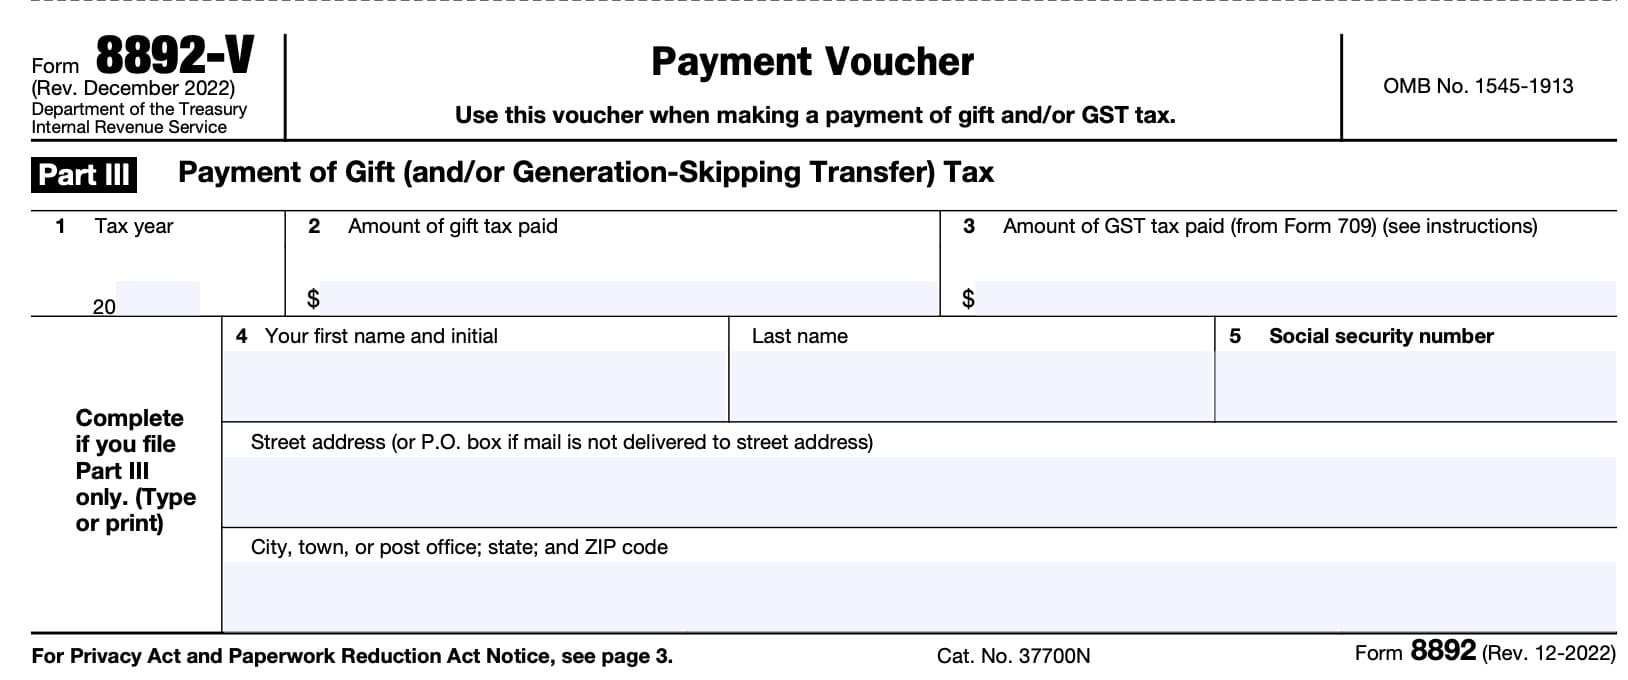 irs form 8892, Part III, Payment of Gift or GST Tax. Also known as irs form 8892-V, payment voucher